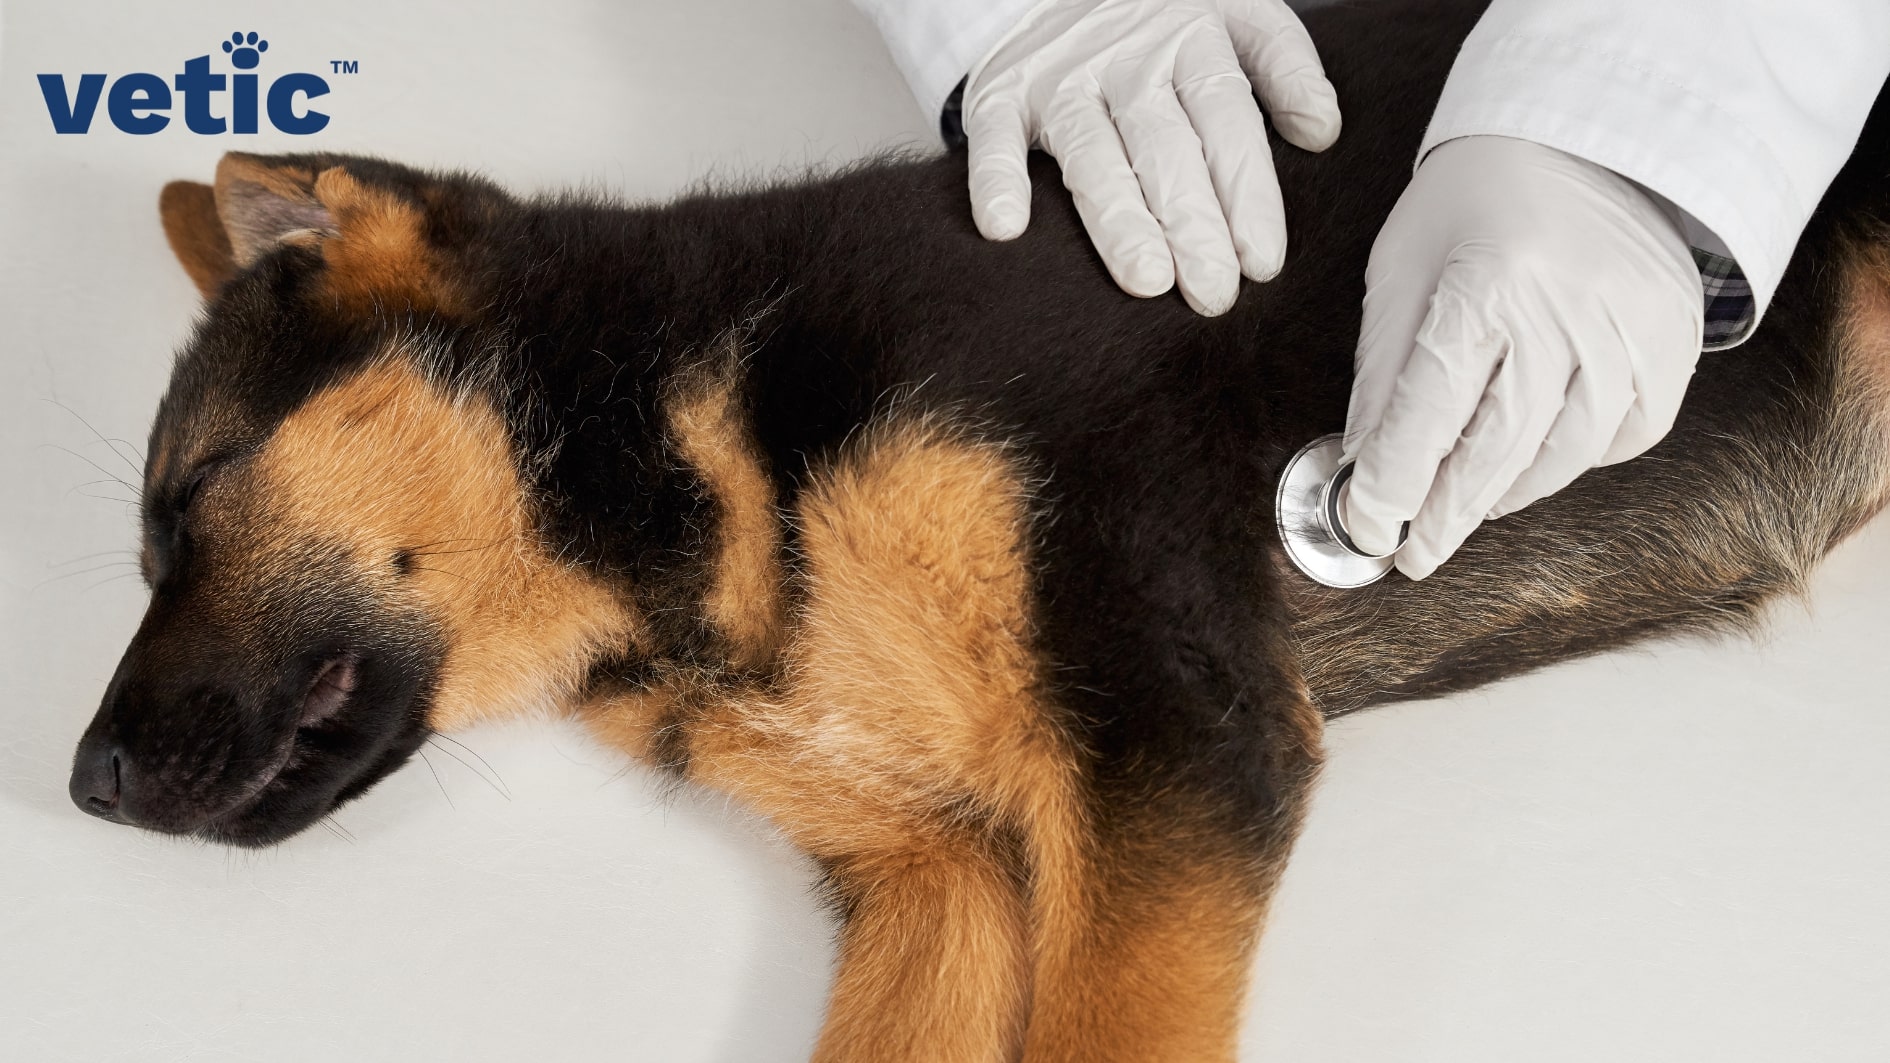 Around 2 months old tan and black German Shepherd puppy lying on the veterinary examination table with their eyes closed. two gloved hands are visible along with the cuffs of a lab coat. the right hand is holding the upper chest while the left is placing a stethoscope on the chest right behind the left elbow.